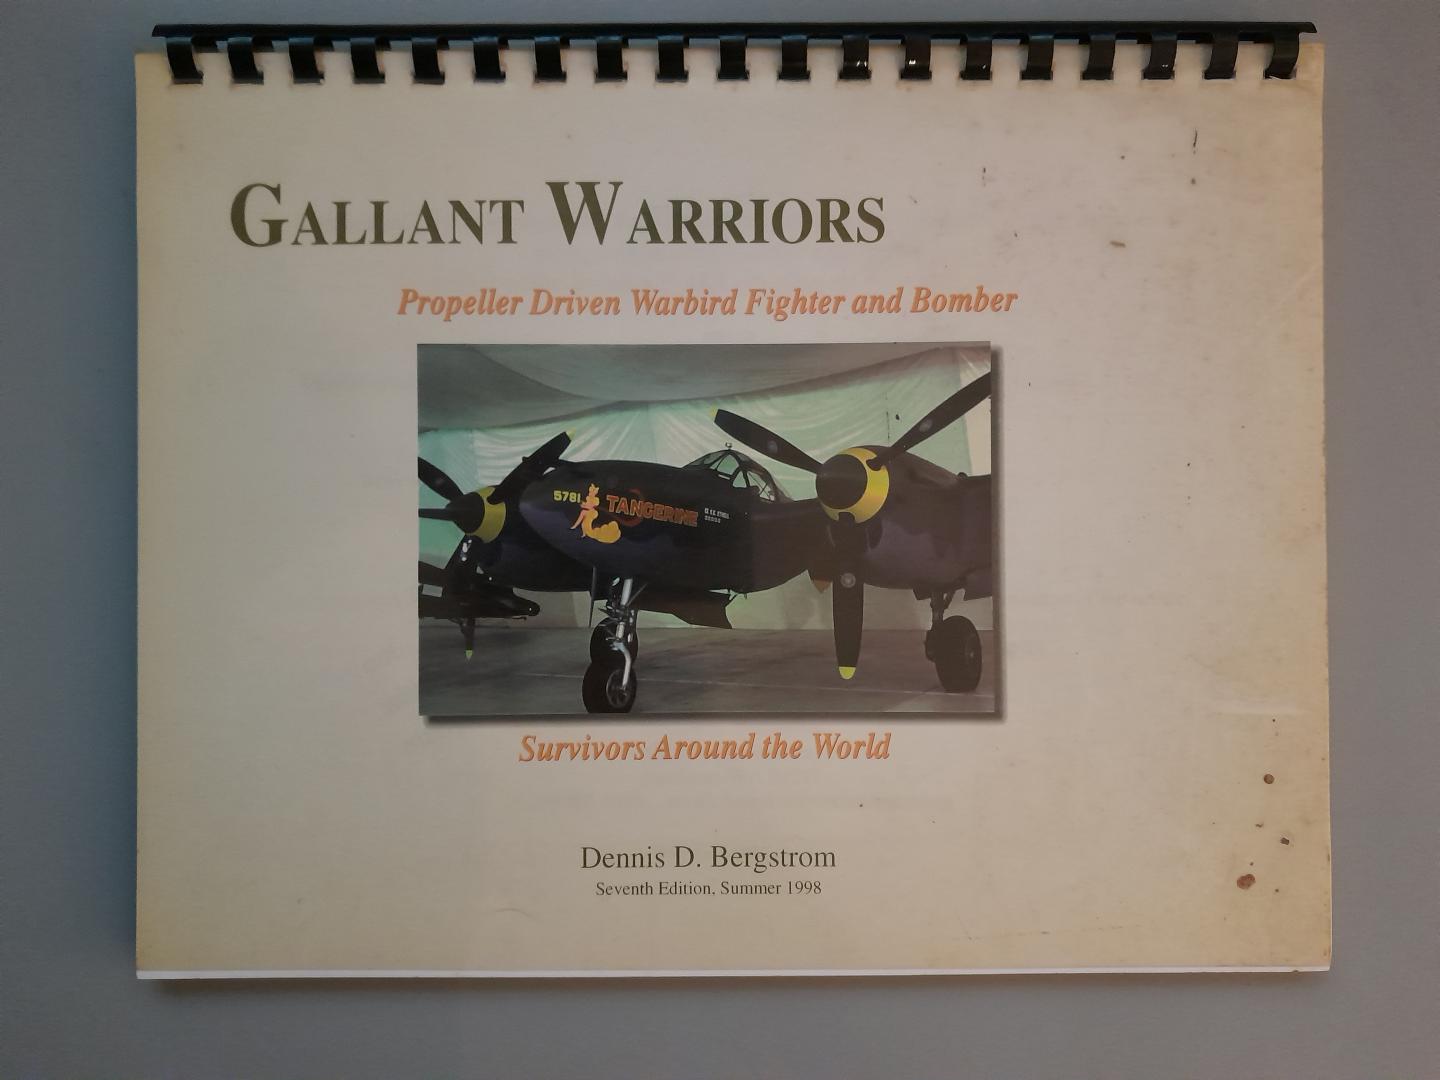 Bergstrom, D.D. - Galant Wings, prop driven warbirds; fighter & bomber, survivors around the world